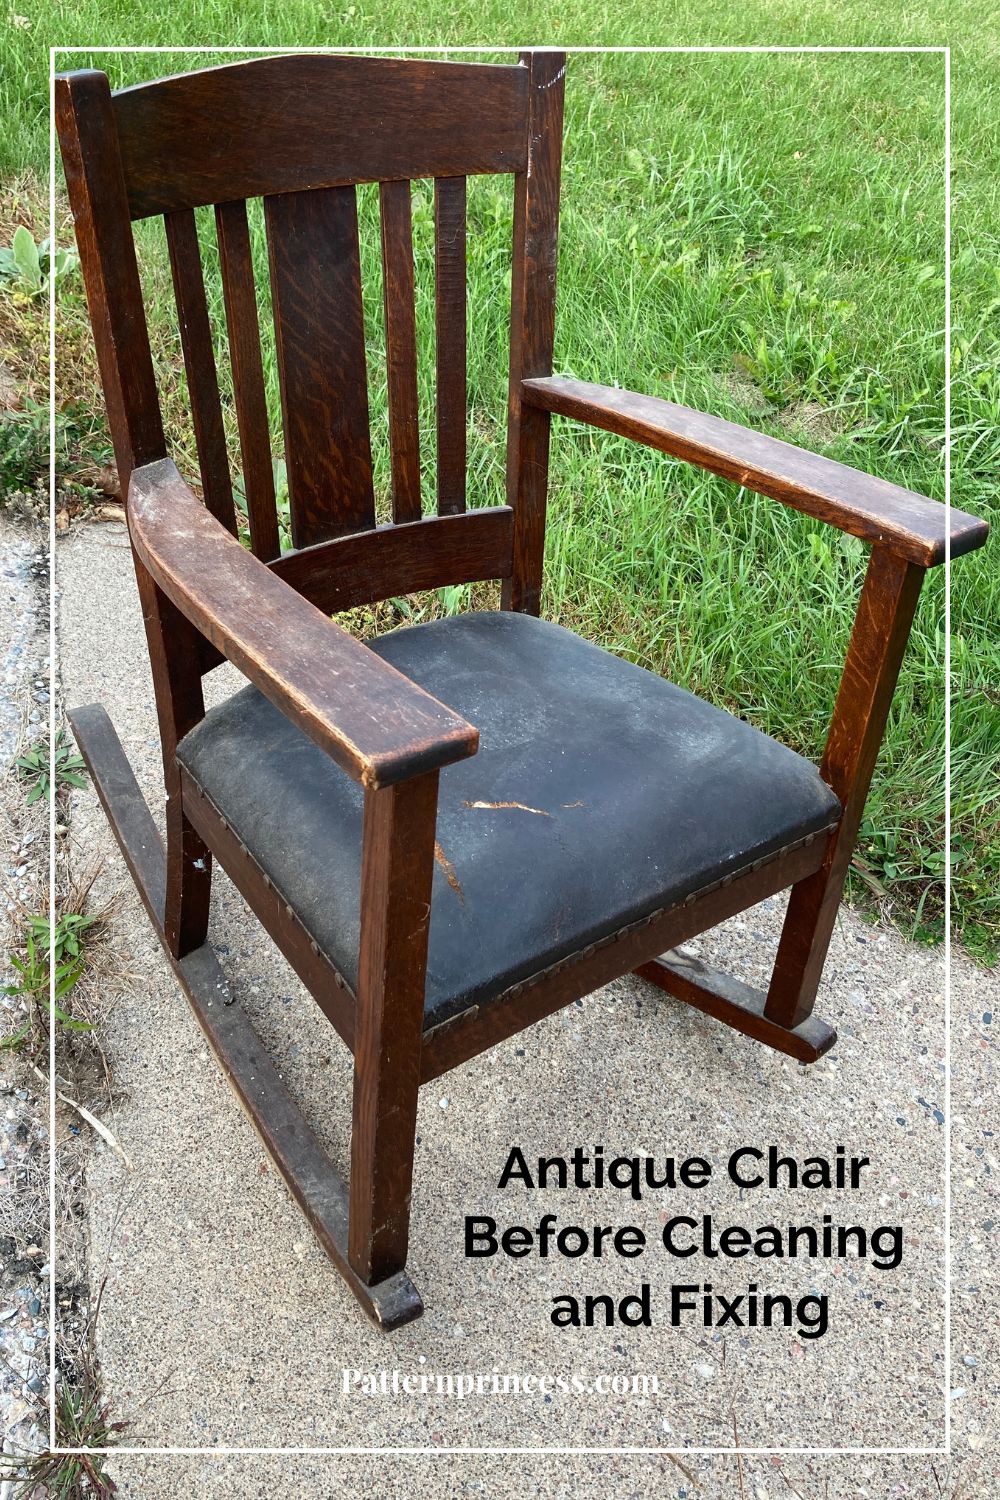 Antique Chair Before Cleaning and Fixing